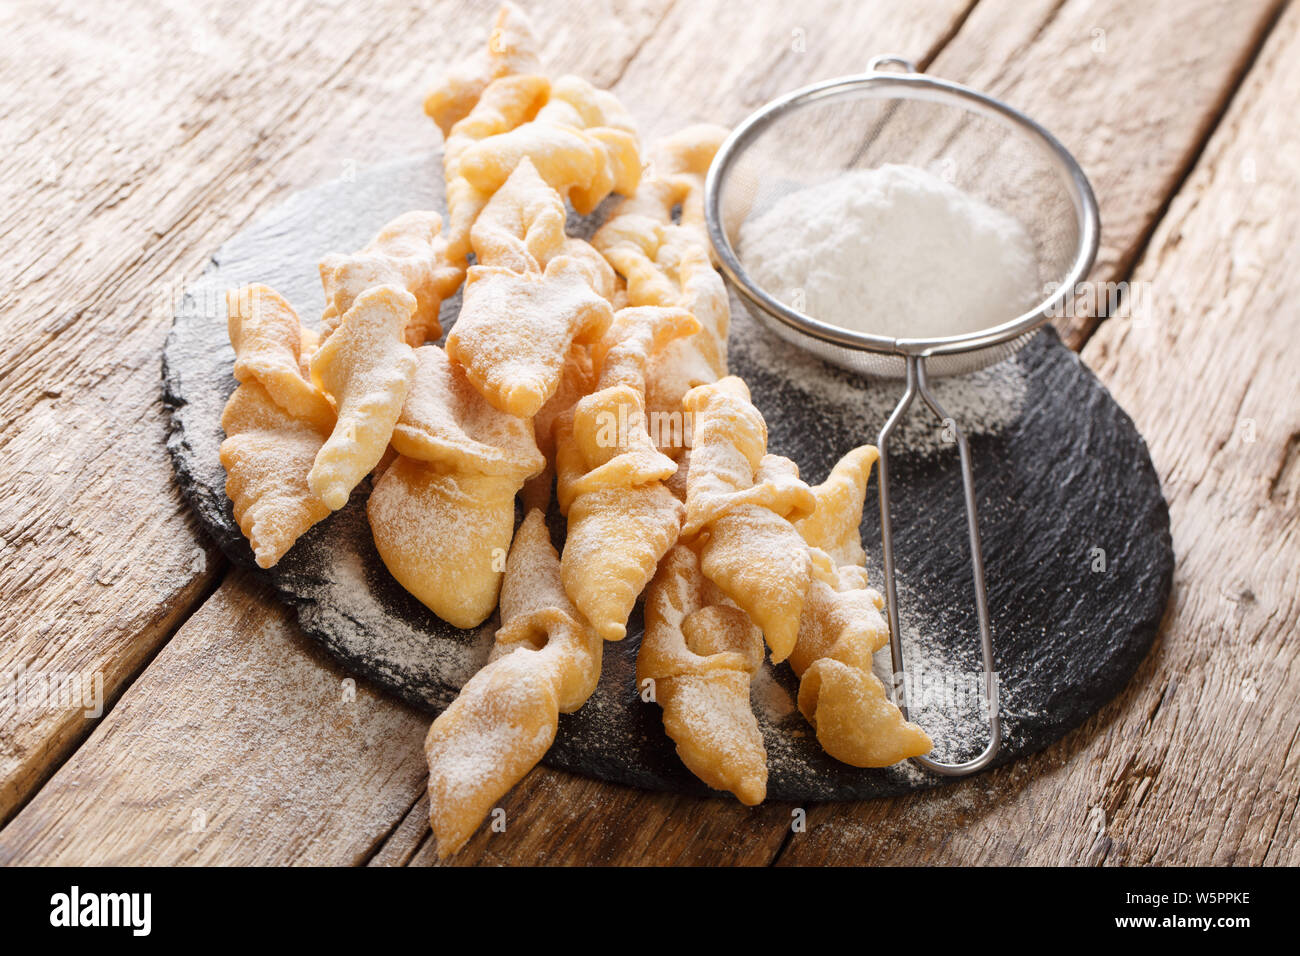 Angel wings (Faworki), cakes deep fried in oil to celebrate Fat Thursday close-up on the table. horizontal Stock Photo